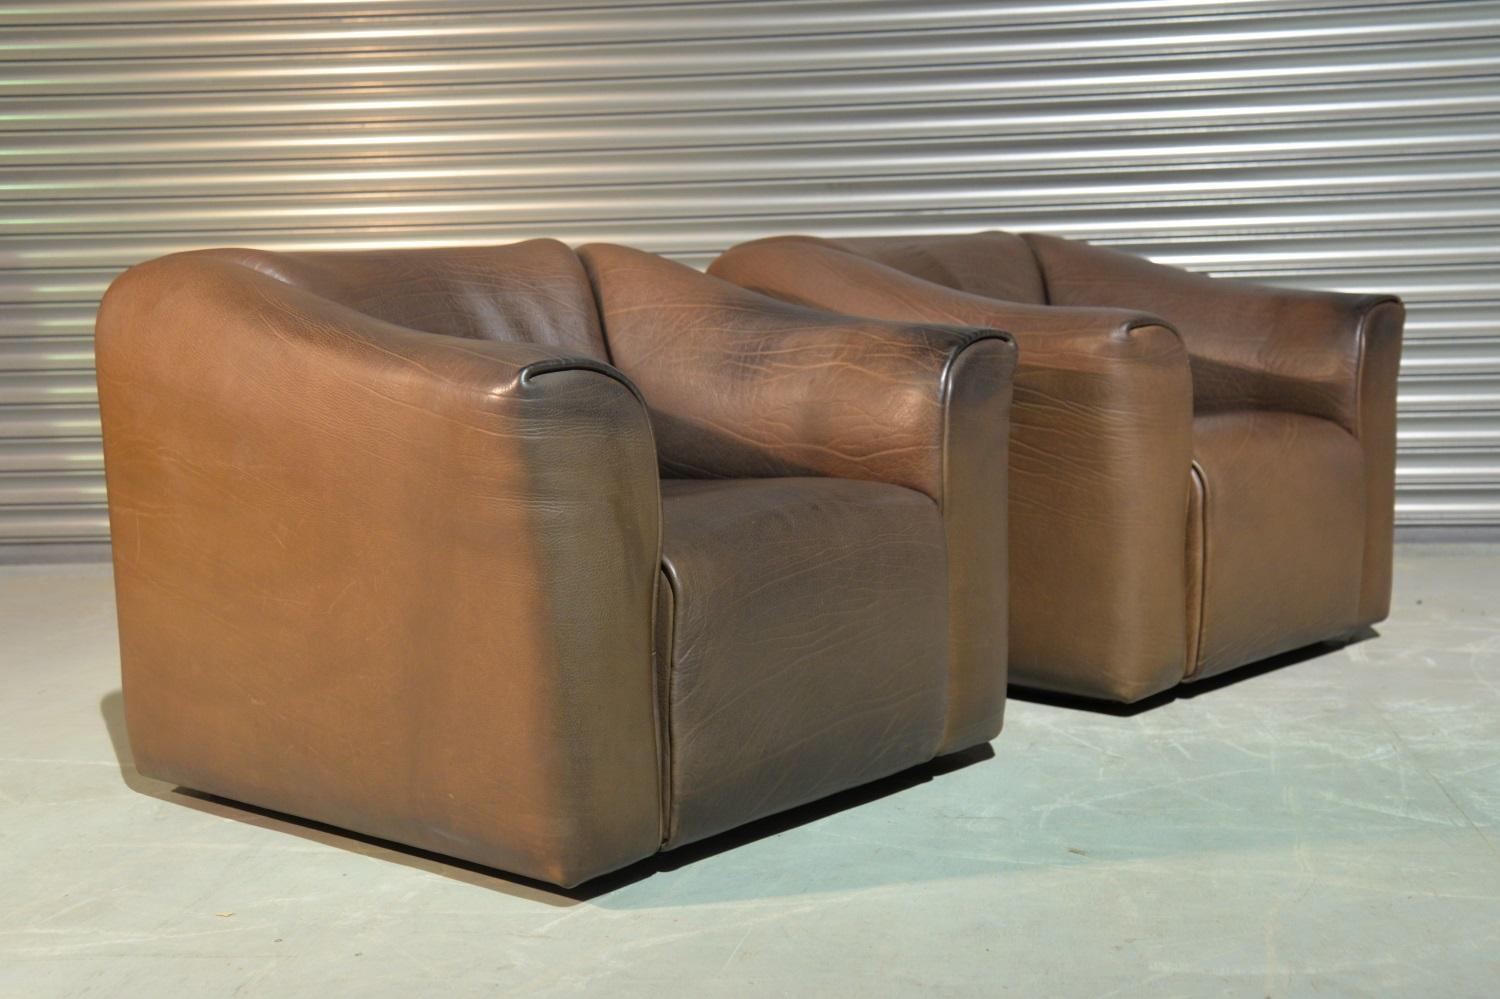 Discounted airfreight for our US and International customers (from 2 weeks door to door)

We are delighted to bring to you a pair of ultra rare vintage De Sede DS 47 armchairs. Hand built in the 1970s by De Sede craftsman in Switzerland, these